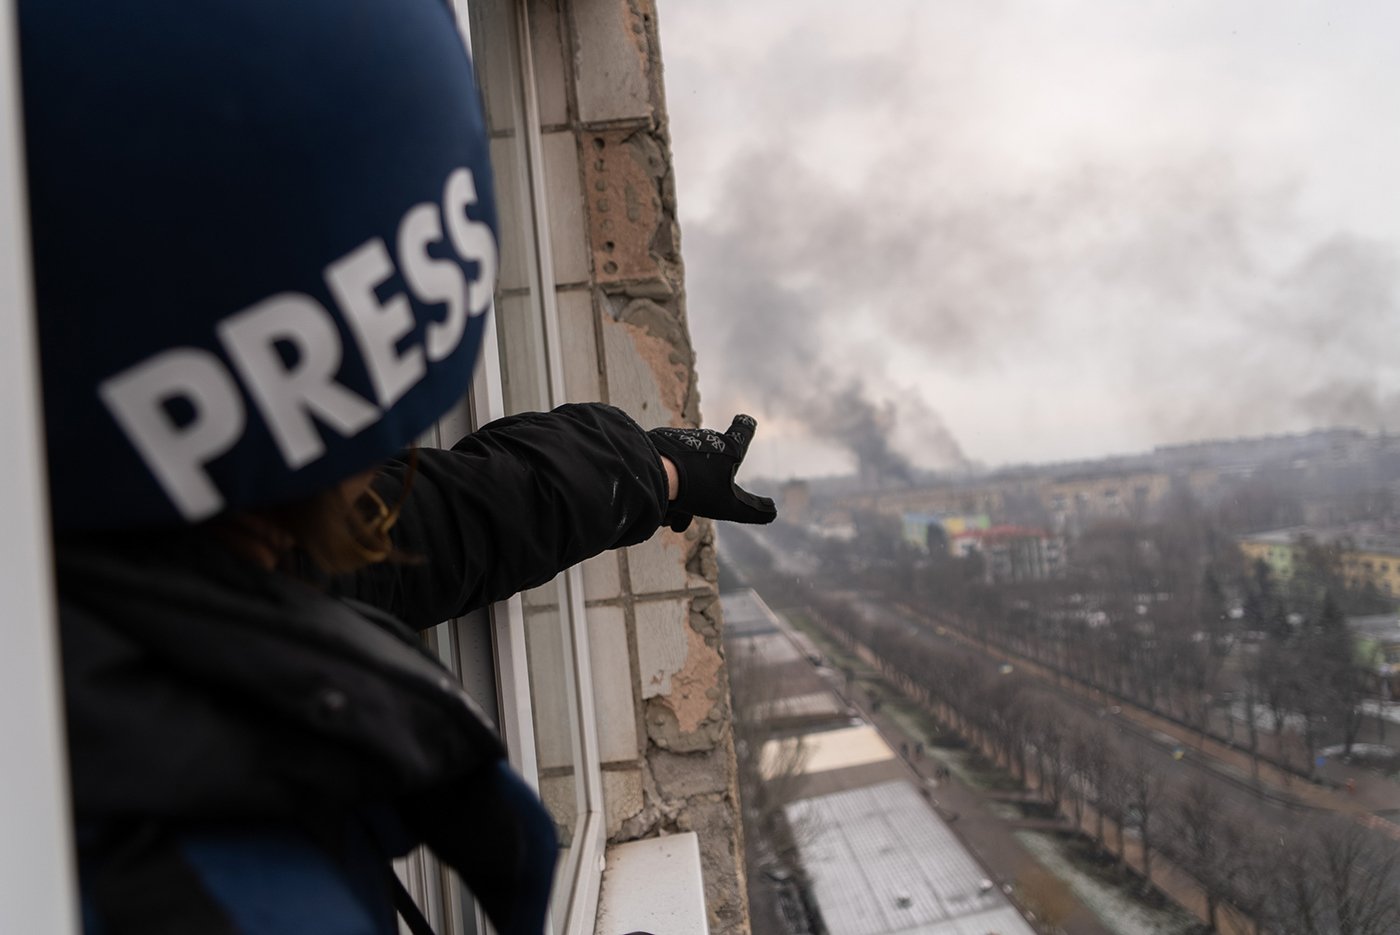 Photographer Evgeniy Maloletka points at the smoke rising after an airstrike on a maternity hospital in Mariupol, Ukraine, March 9, 2022. Still from FRONTLINE PBS and AP’s feature film “20 Days in Mariupol.” Credit: AP Photo/Mstyslav Chernov)